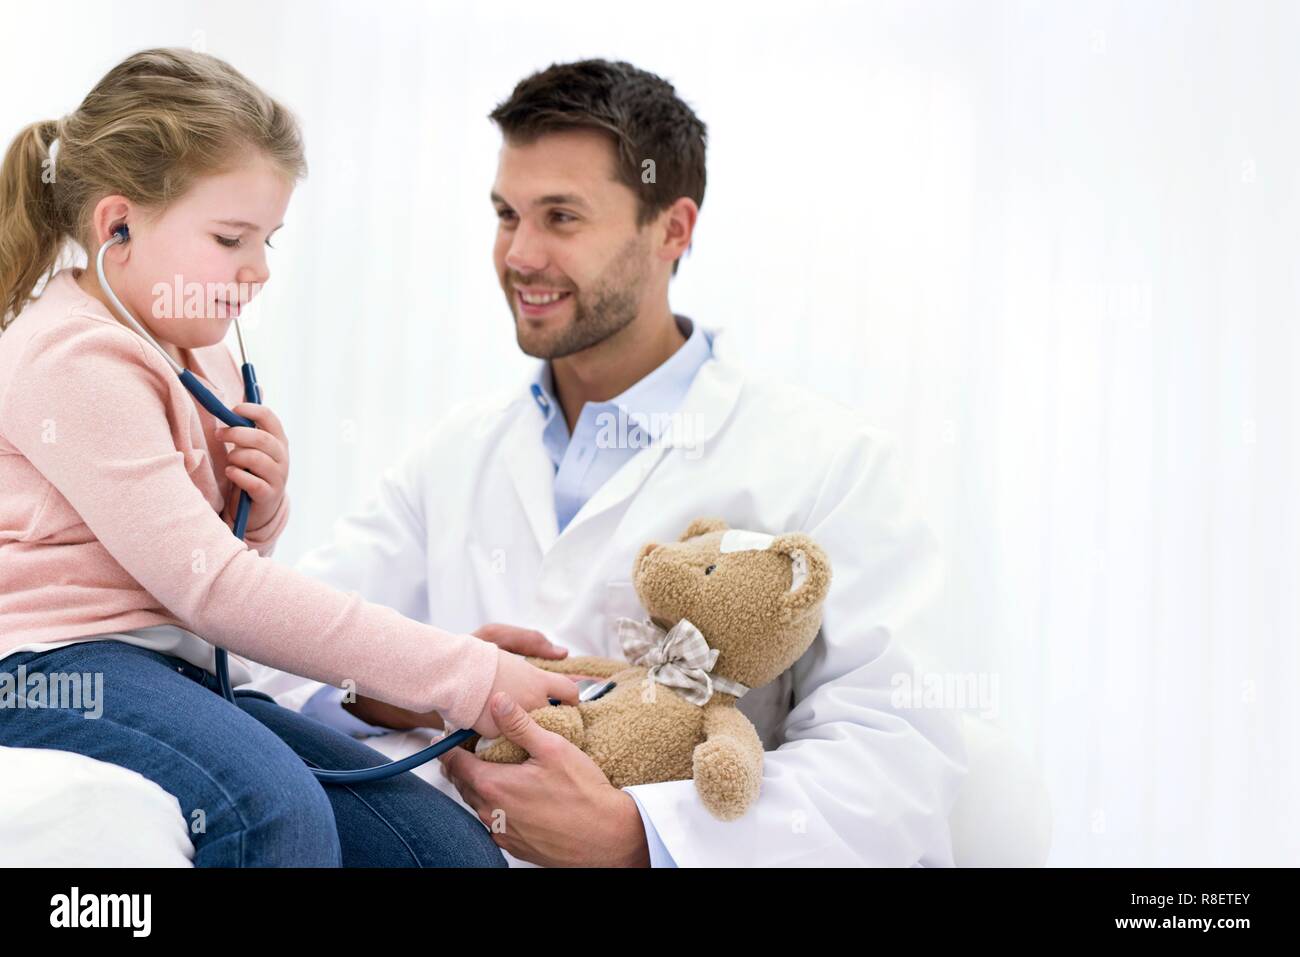 Girl playing with teddy bear and stethoscope. Stock Photo